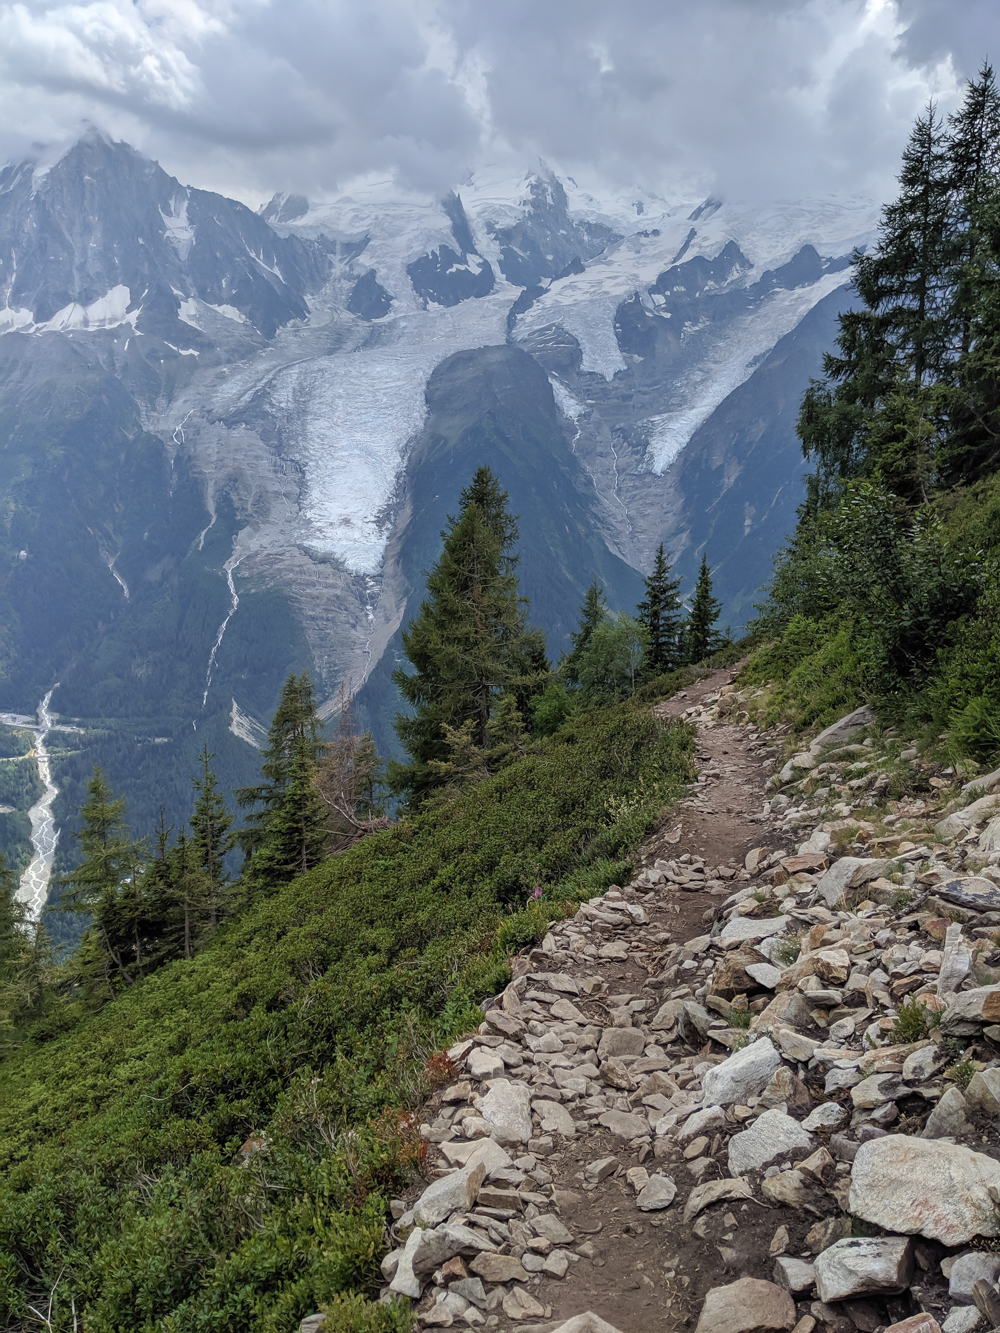 Best hikes in Chamonix: Plan de l'Aiguille to Mer de Glace and Montenvers on the Grand Balcon Nord / best day hikes in Chamonix / Mer de glace glacier, hiking in chamonix / the view on the way to Merlet